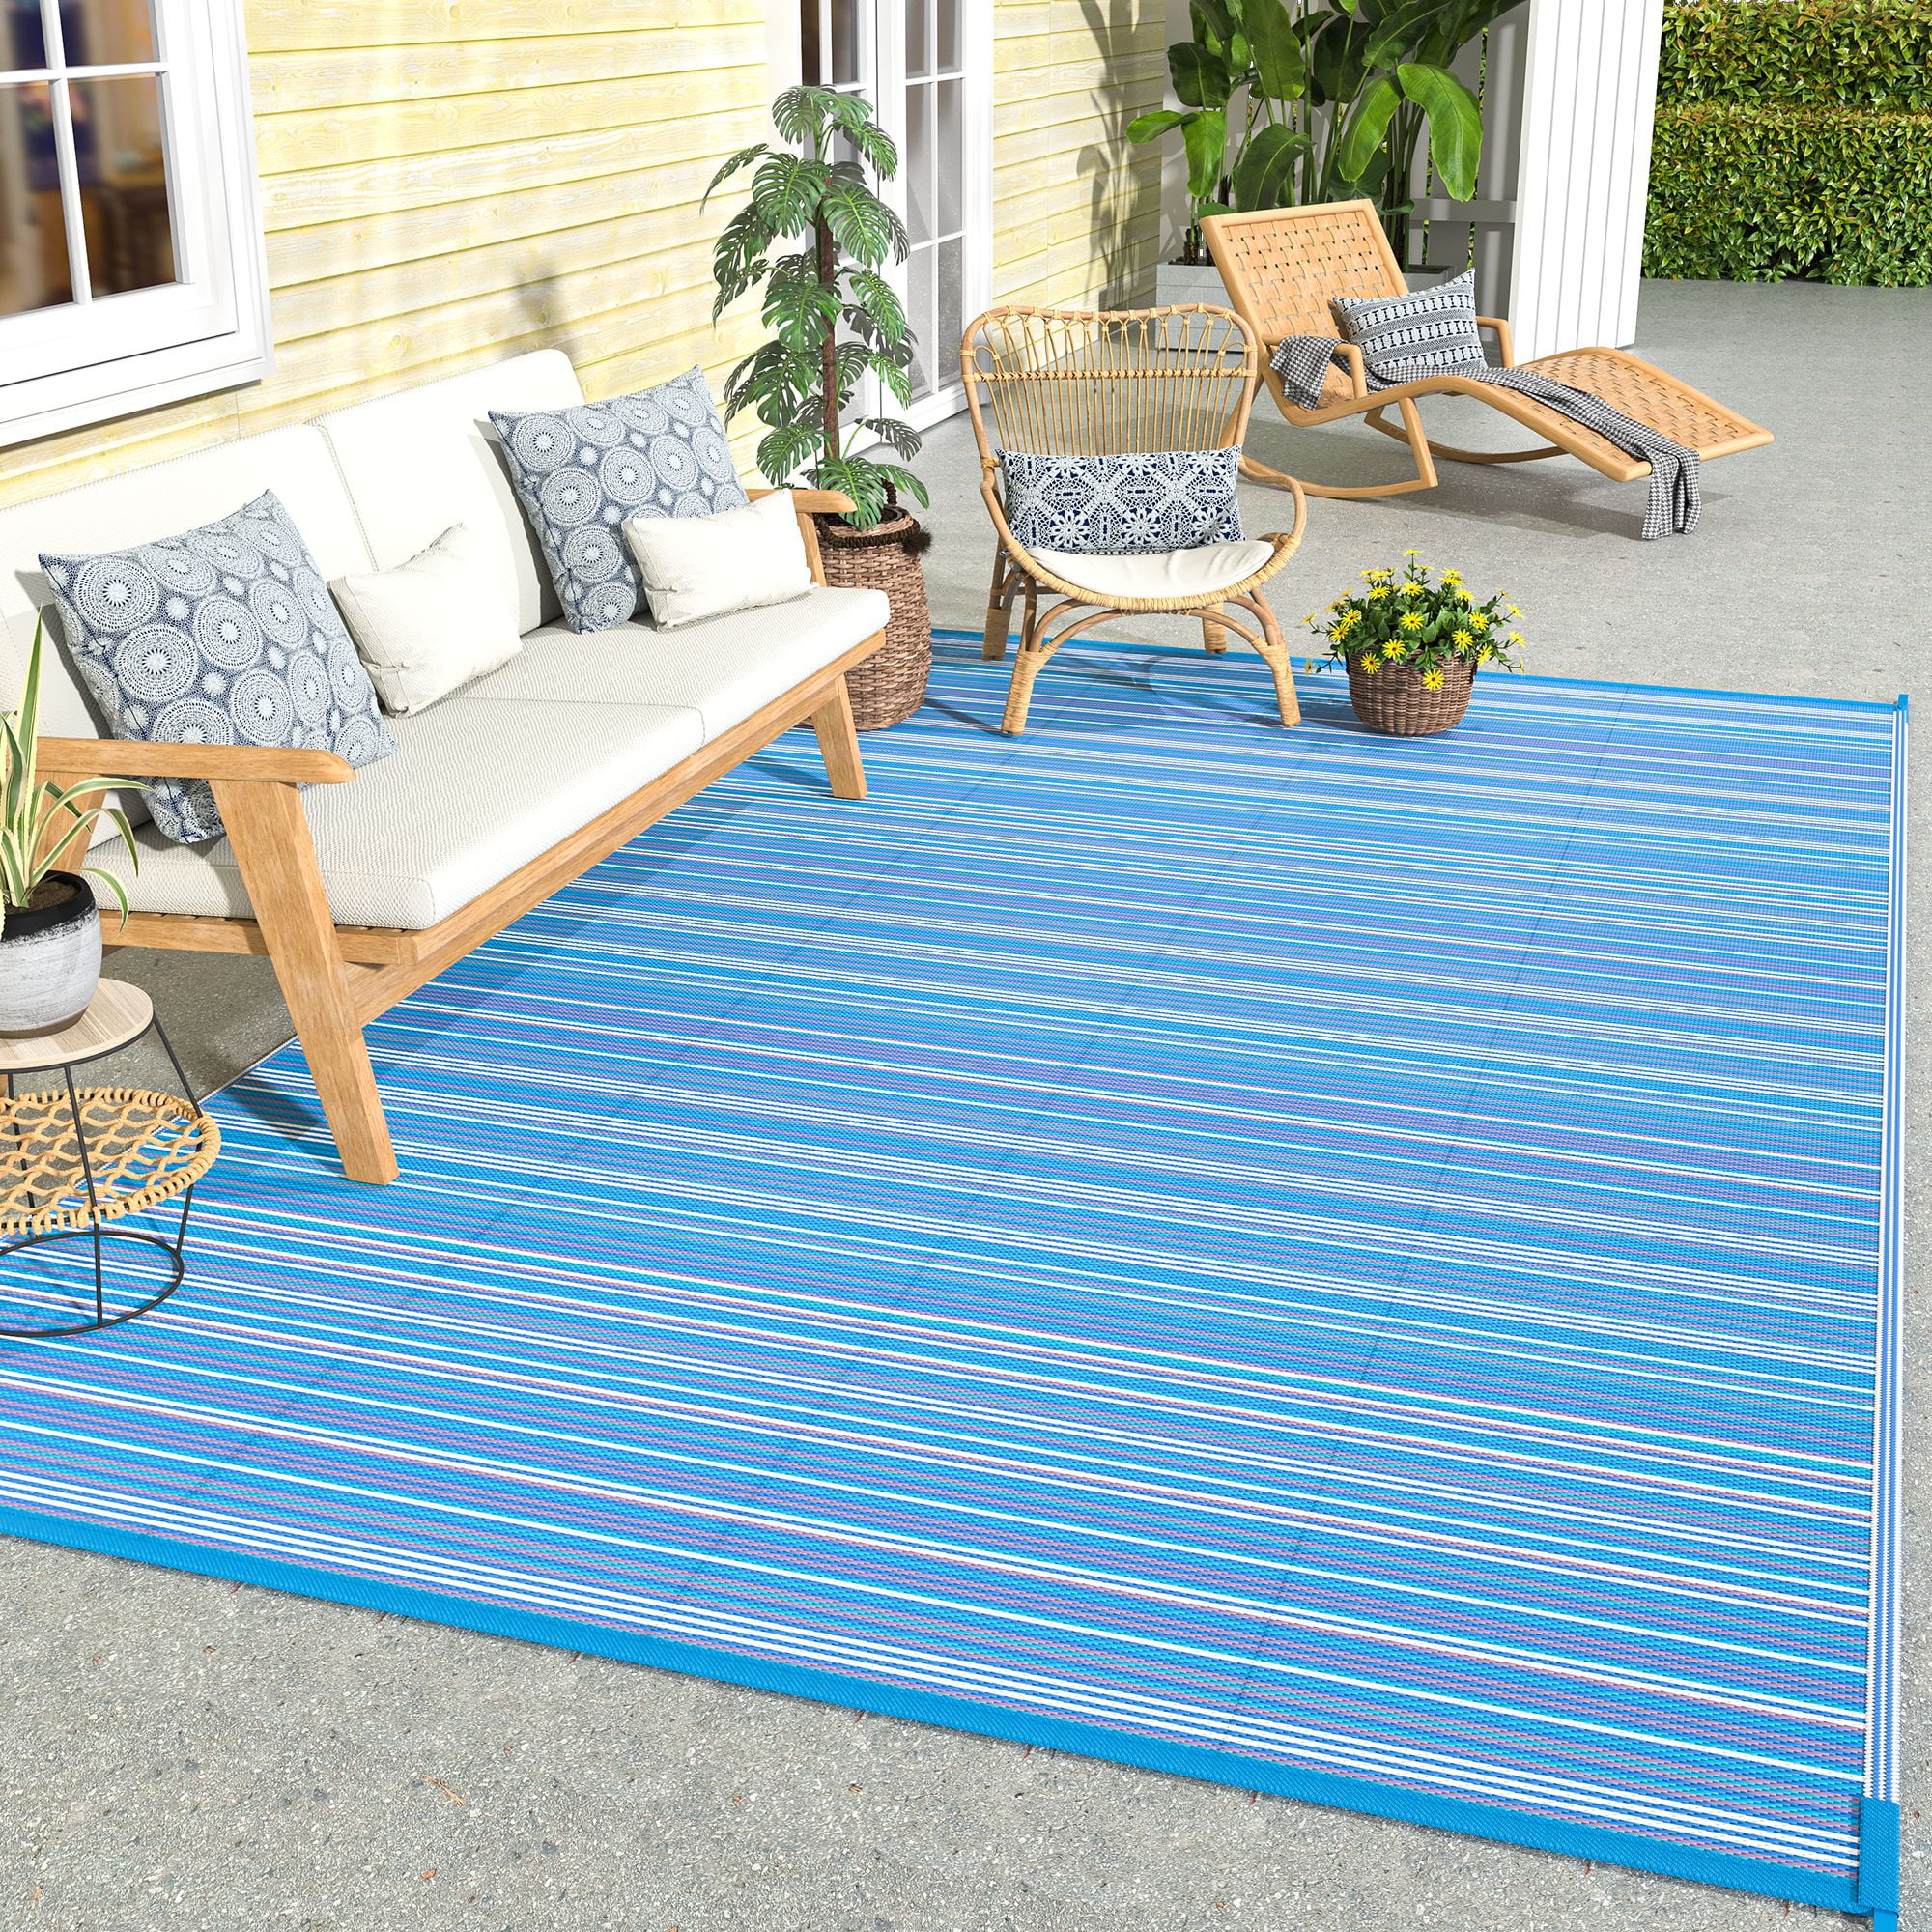 DEORAB 5x8 Outdoor Rug Waterproof, Reversible Mats, Outdoor Area Rug,  Plastic Outside Carpet, Geometric Rv Mat for Patio,Camping,Multi Blue